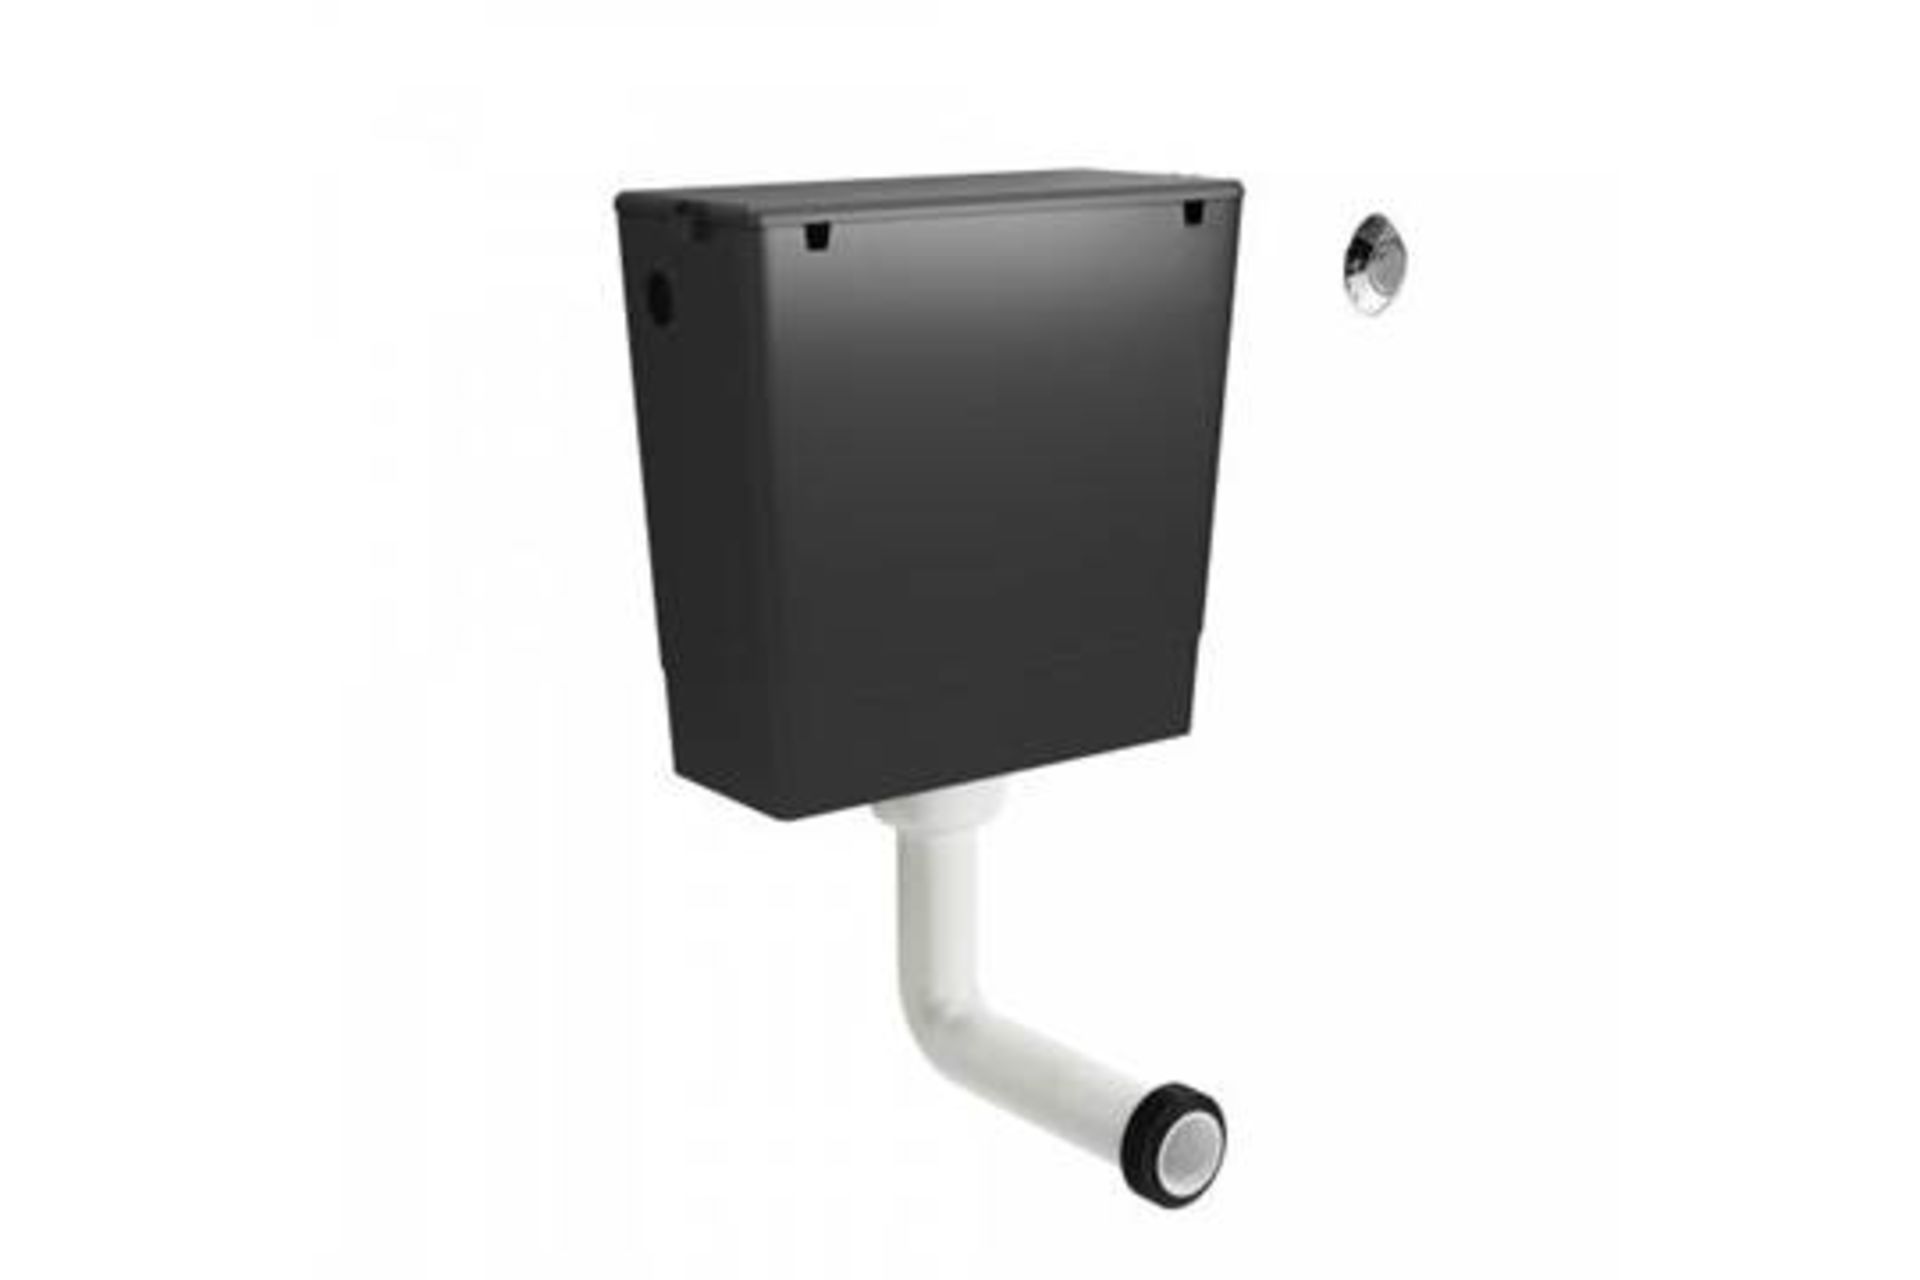 (YU1014) Wirquin Dual Flush Concealed Cistern. RRP £79.99. This Dual Flush Concealed Cistern ... - Image 4 of 4